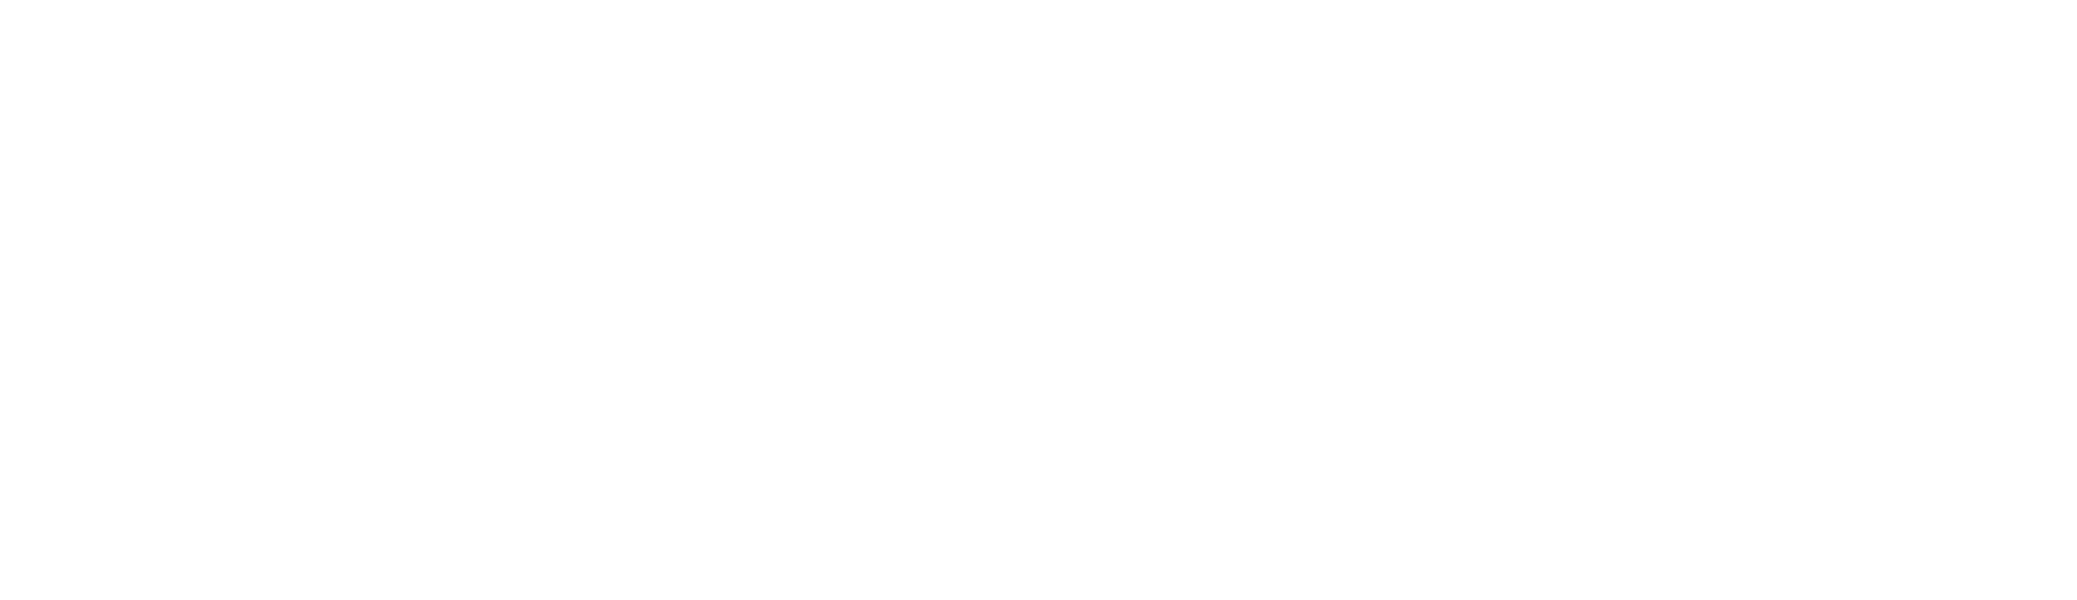 Centre for Public Policy Research, HSUHK